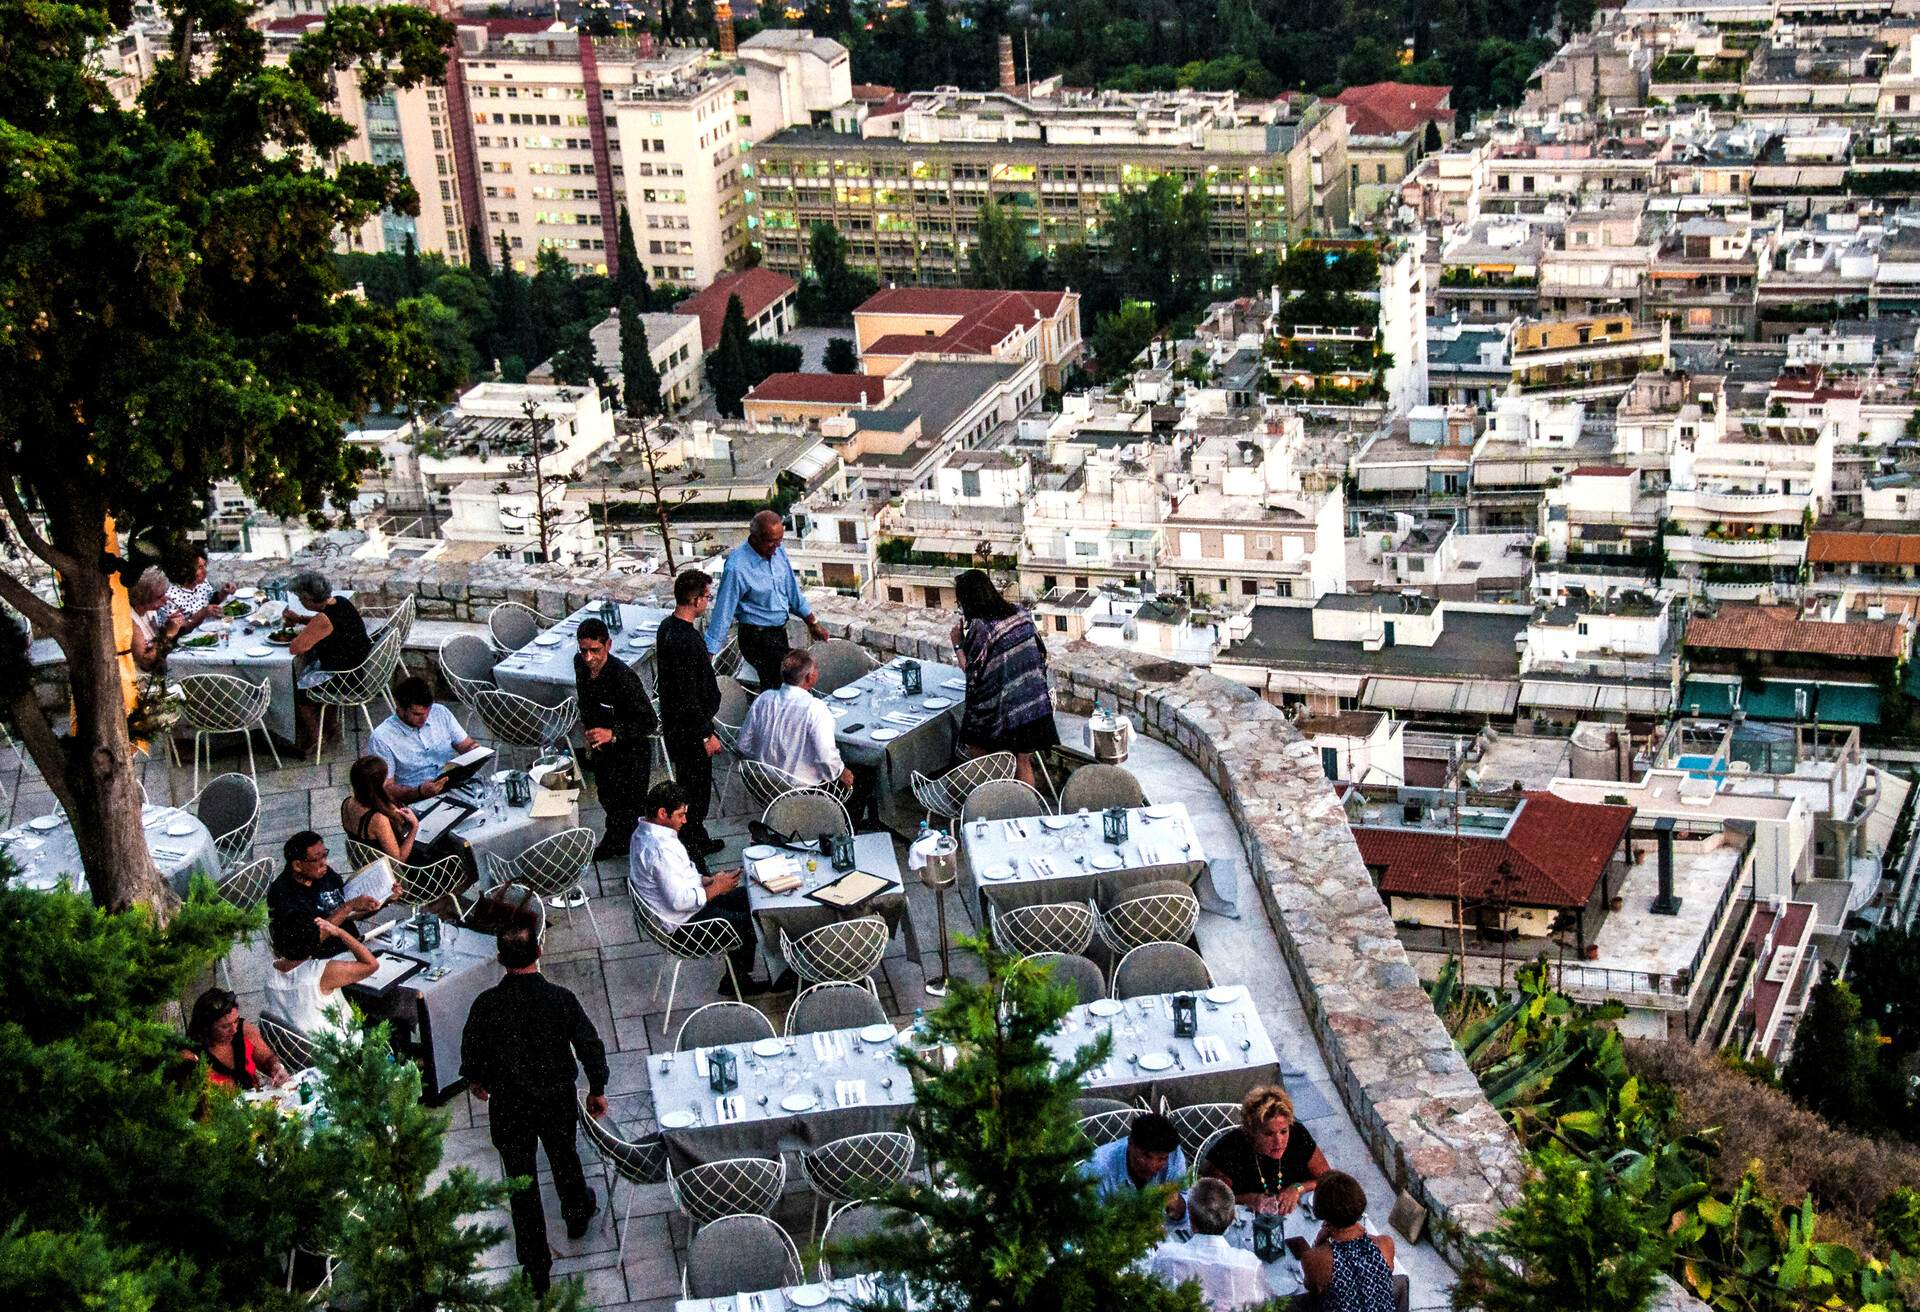 dest_greece_athens_theme_restaurant_rooftop_gettyimages-899494640_universal_within-usage-period_83795.jpg